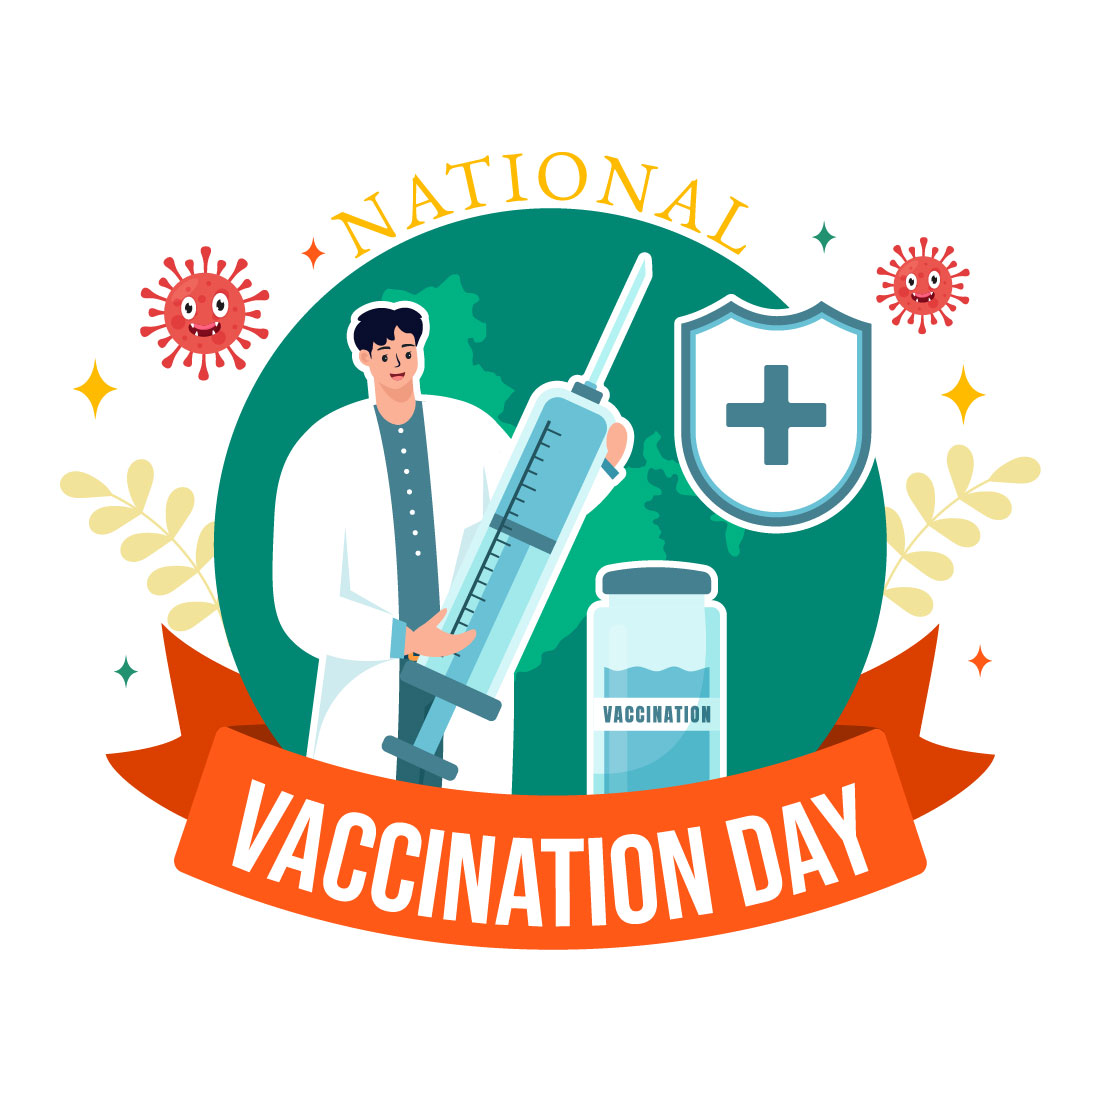 13 National Vaccination Day Illustration cover image.